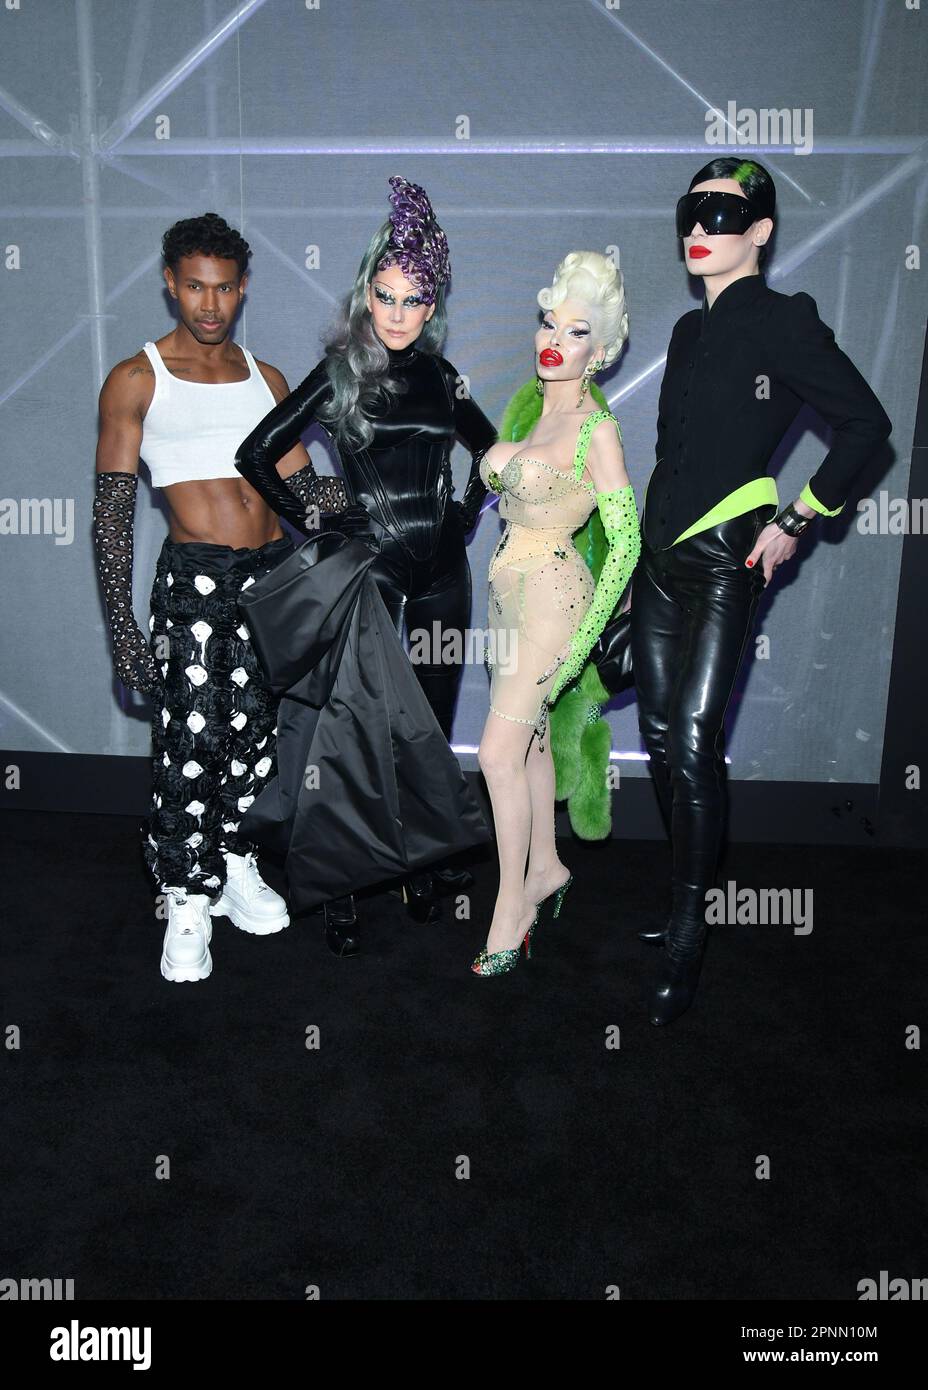 Susanne Bartsch (R), Amanda Lepore (2R) and guests Stock Photo